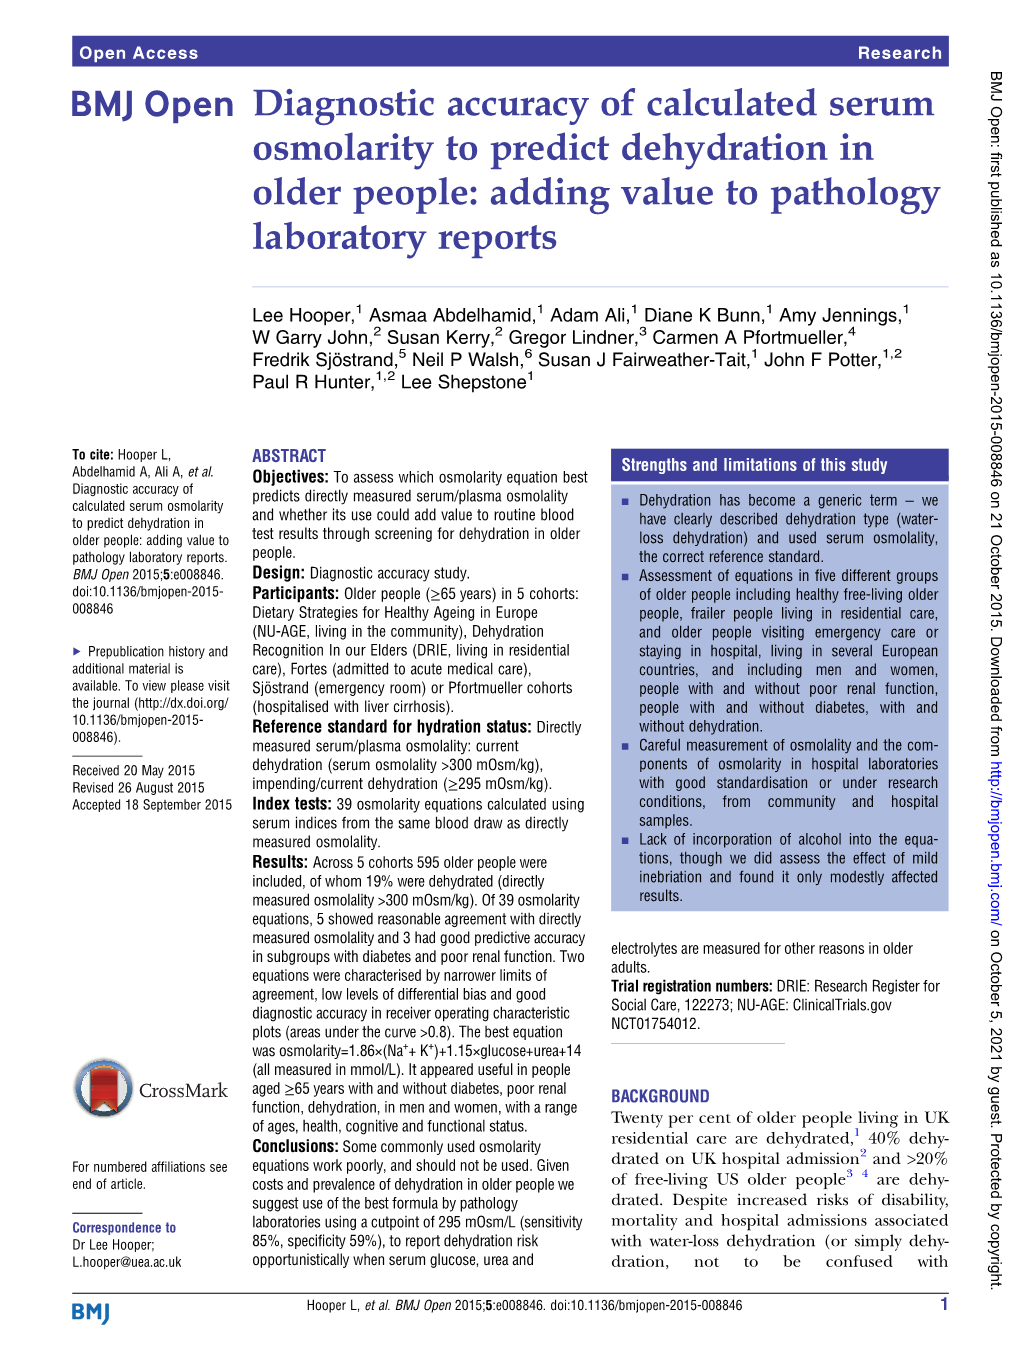 Diagnostic Accuracy of Calculated Serum Osmolarity to Predict Dehydration in Older People: Adding Value to Pathology Laboratory Reports